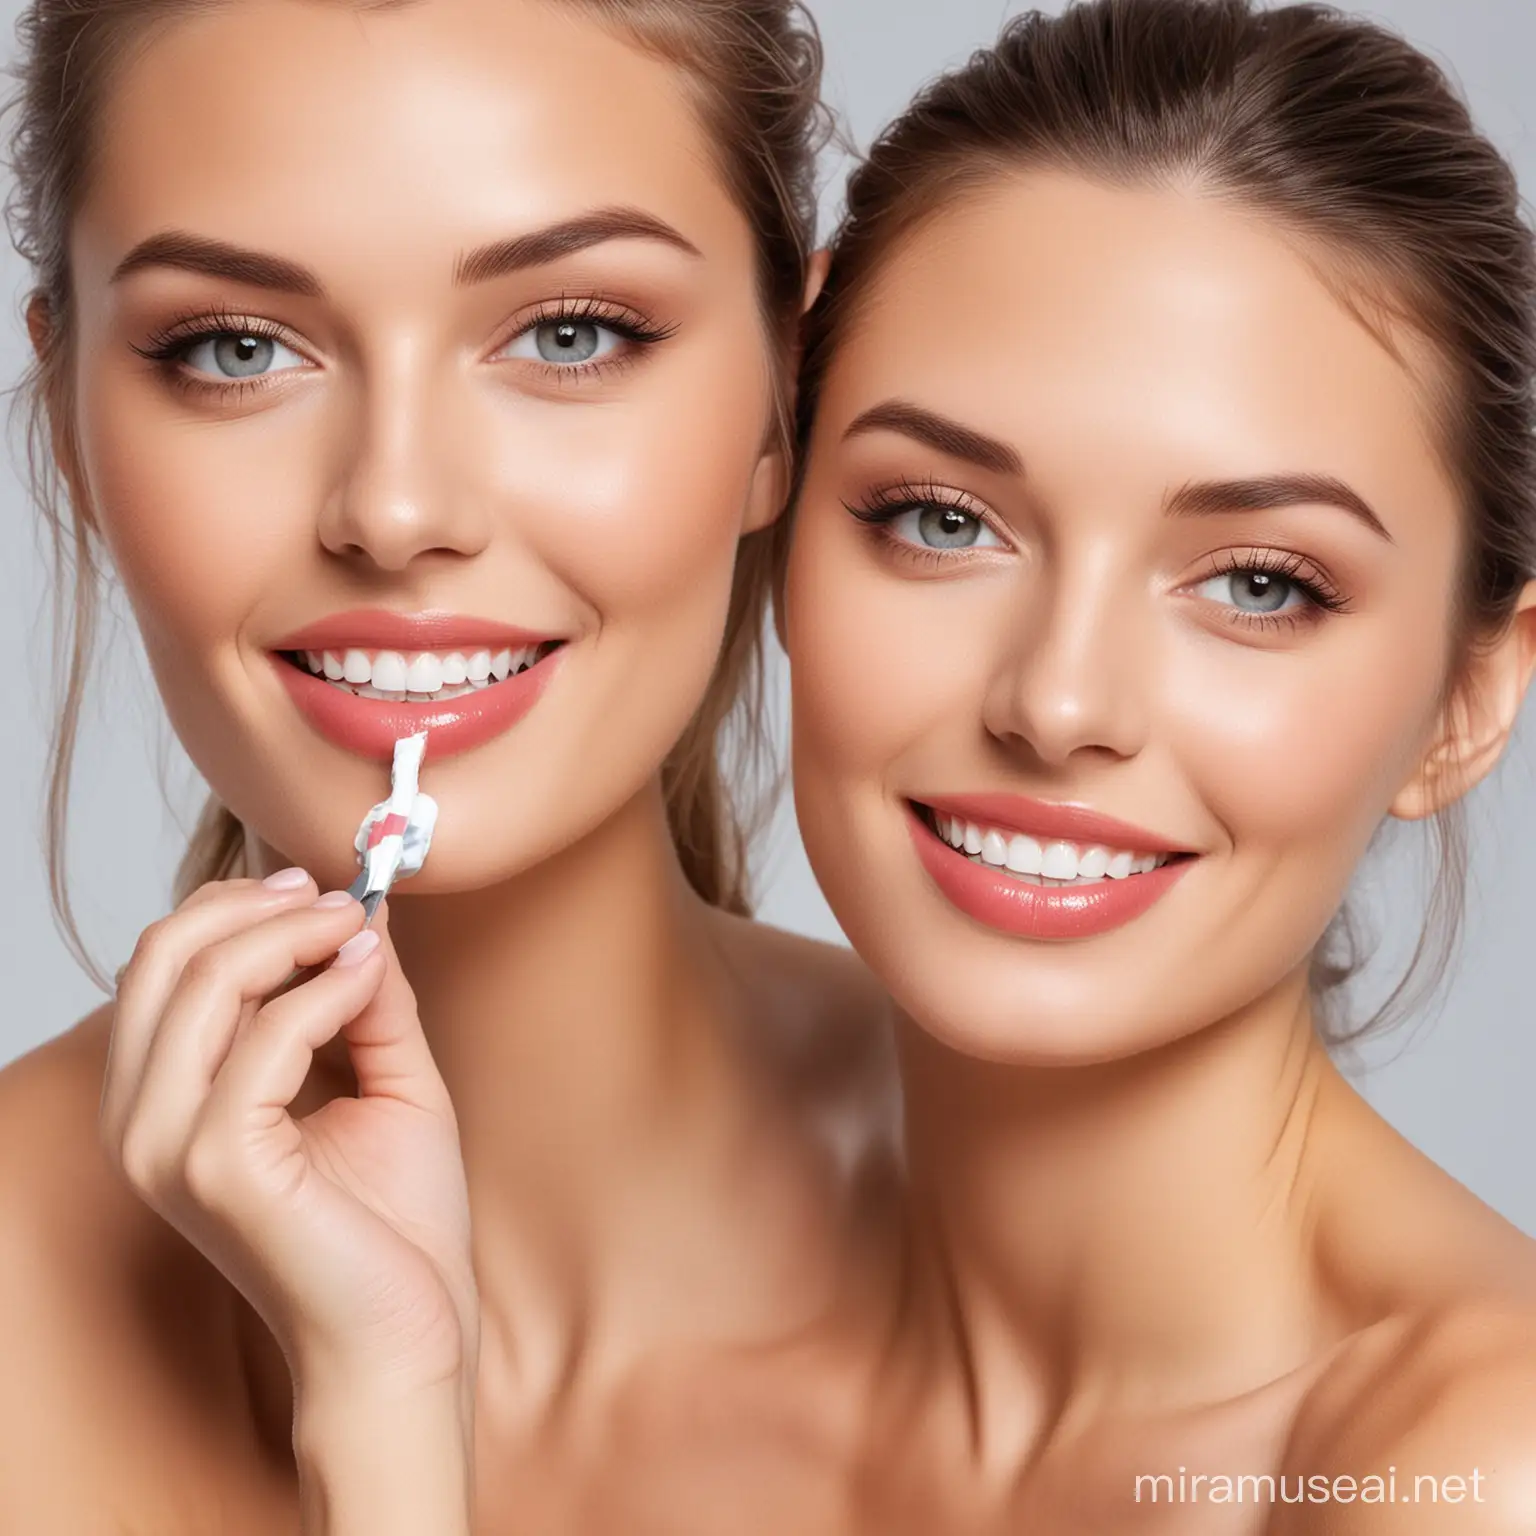 Glamorous Models Posing with Whitening Toothpaste for Stunning Smiles